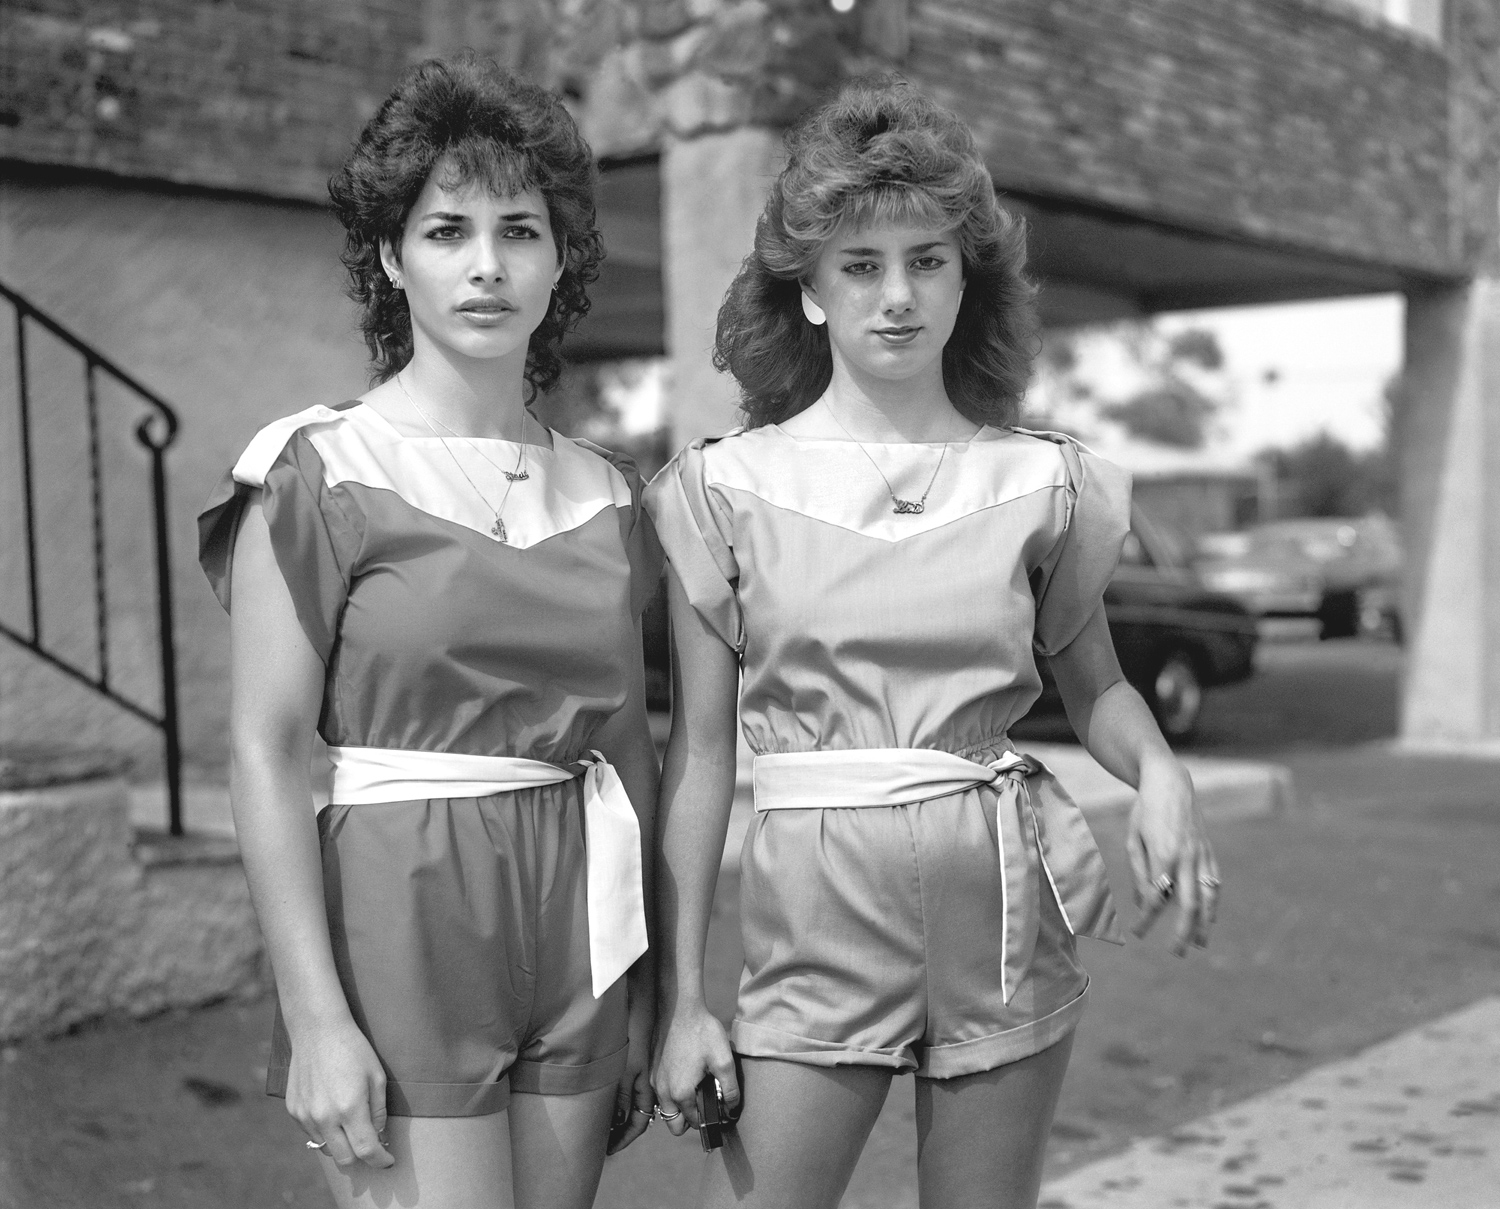 Two young women in matching outfits in front of an open air garage.